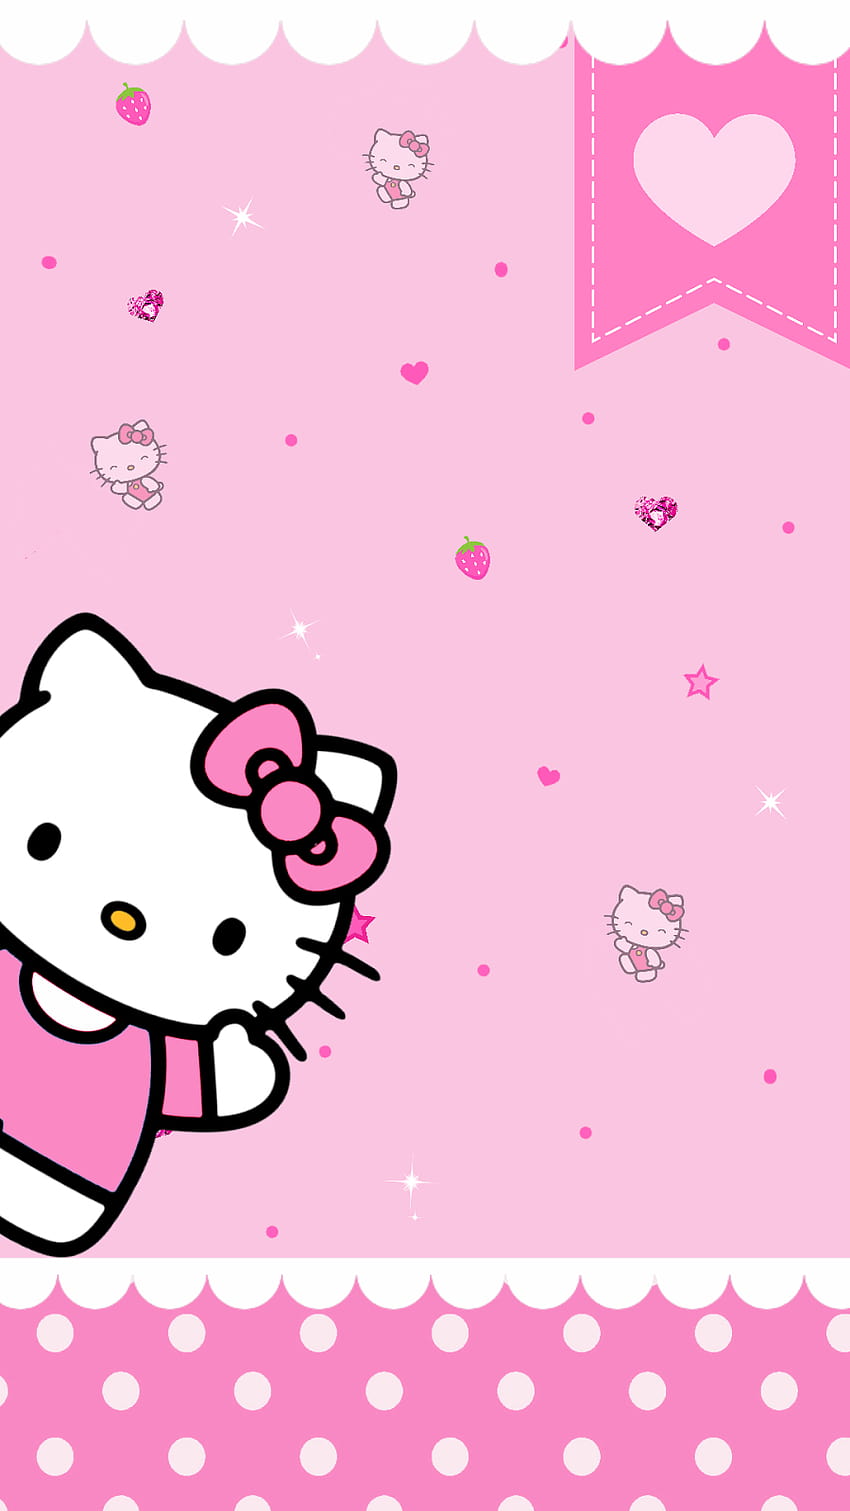 The Top Hello Kitty, hello kitty background png HD phone wallpaper